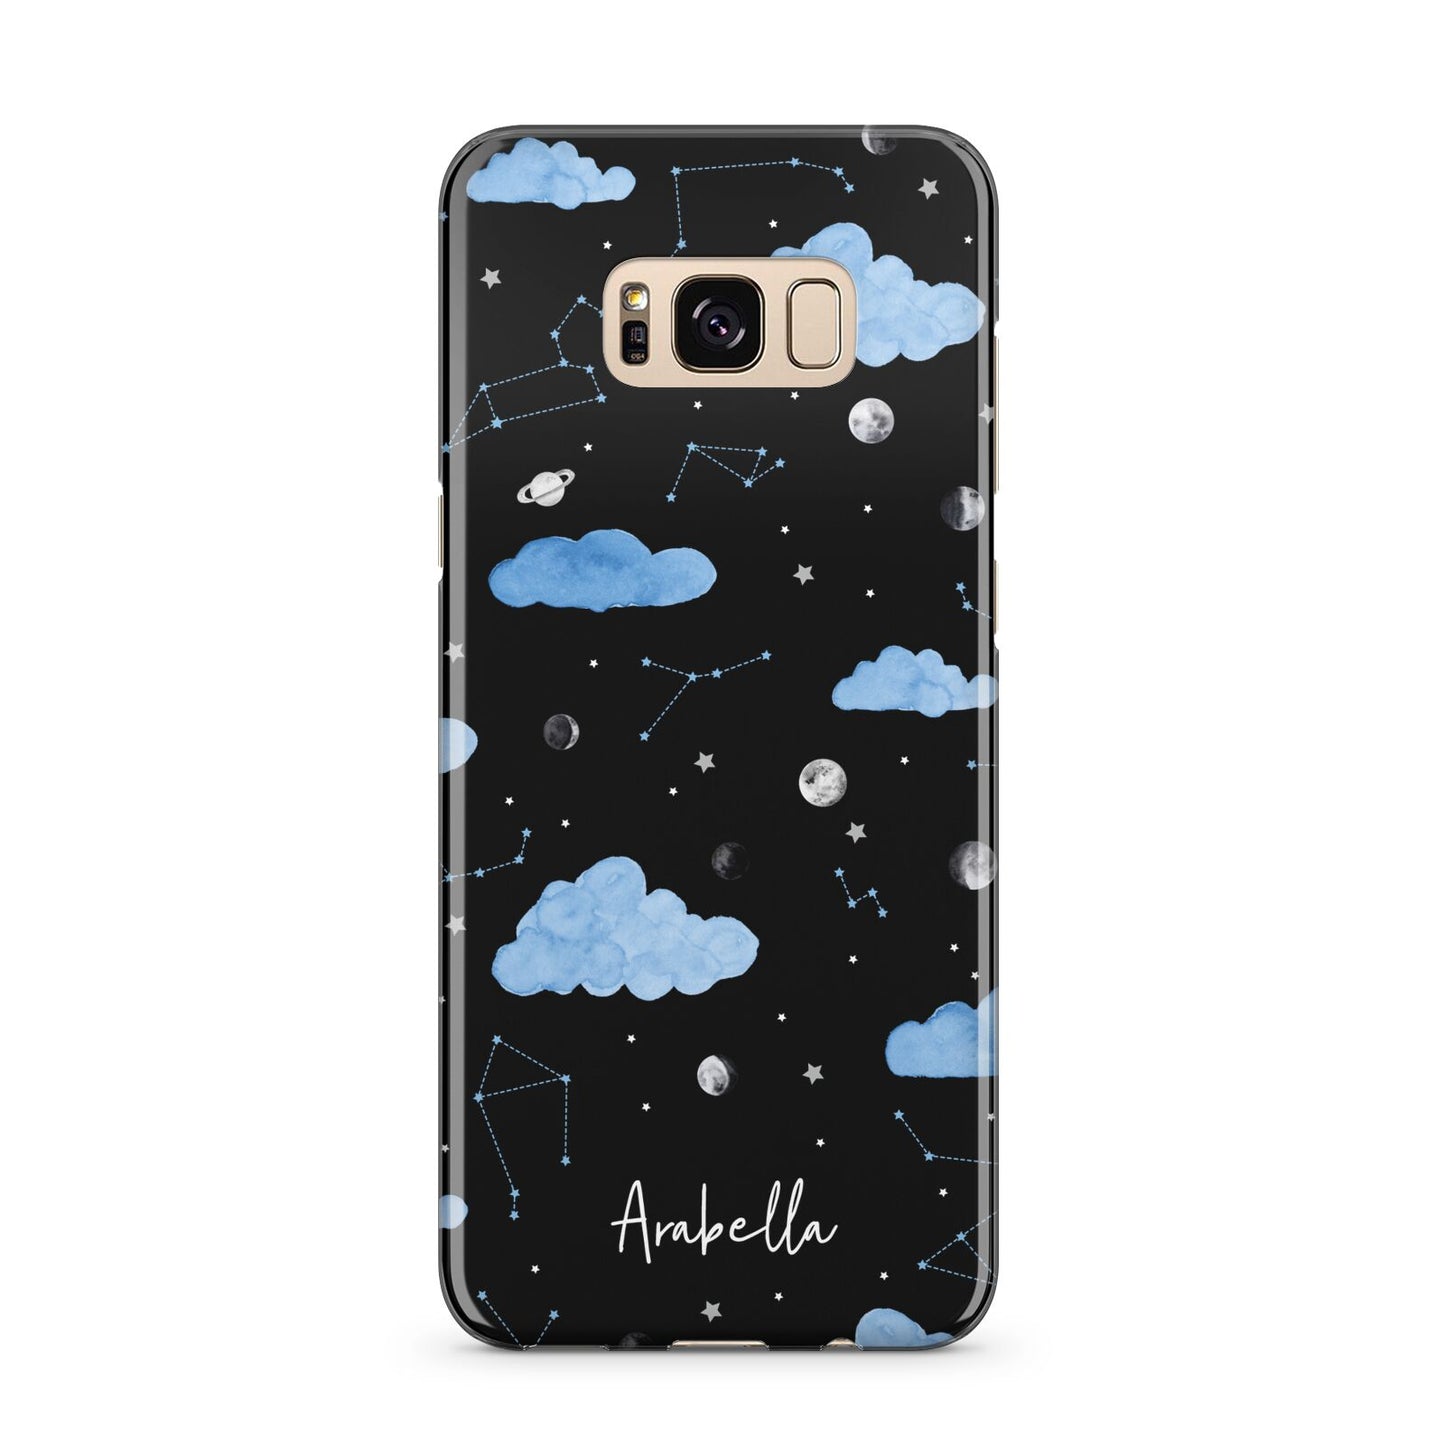 Cloudy Night Sky with Name Samsung Galaxy S8 Plus Case